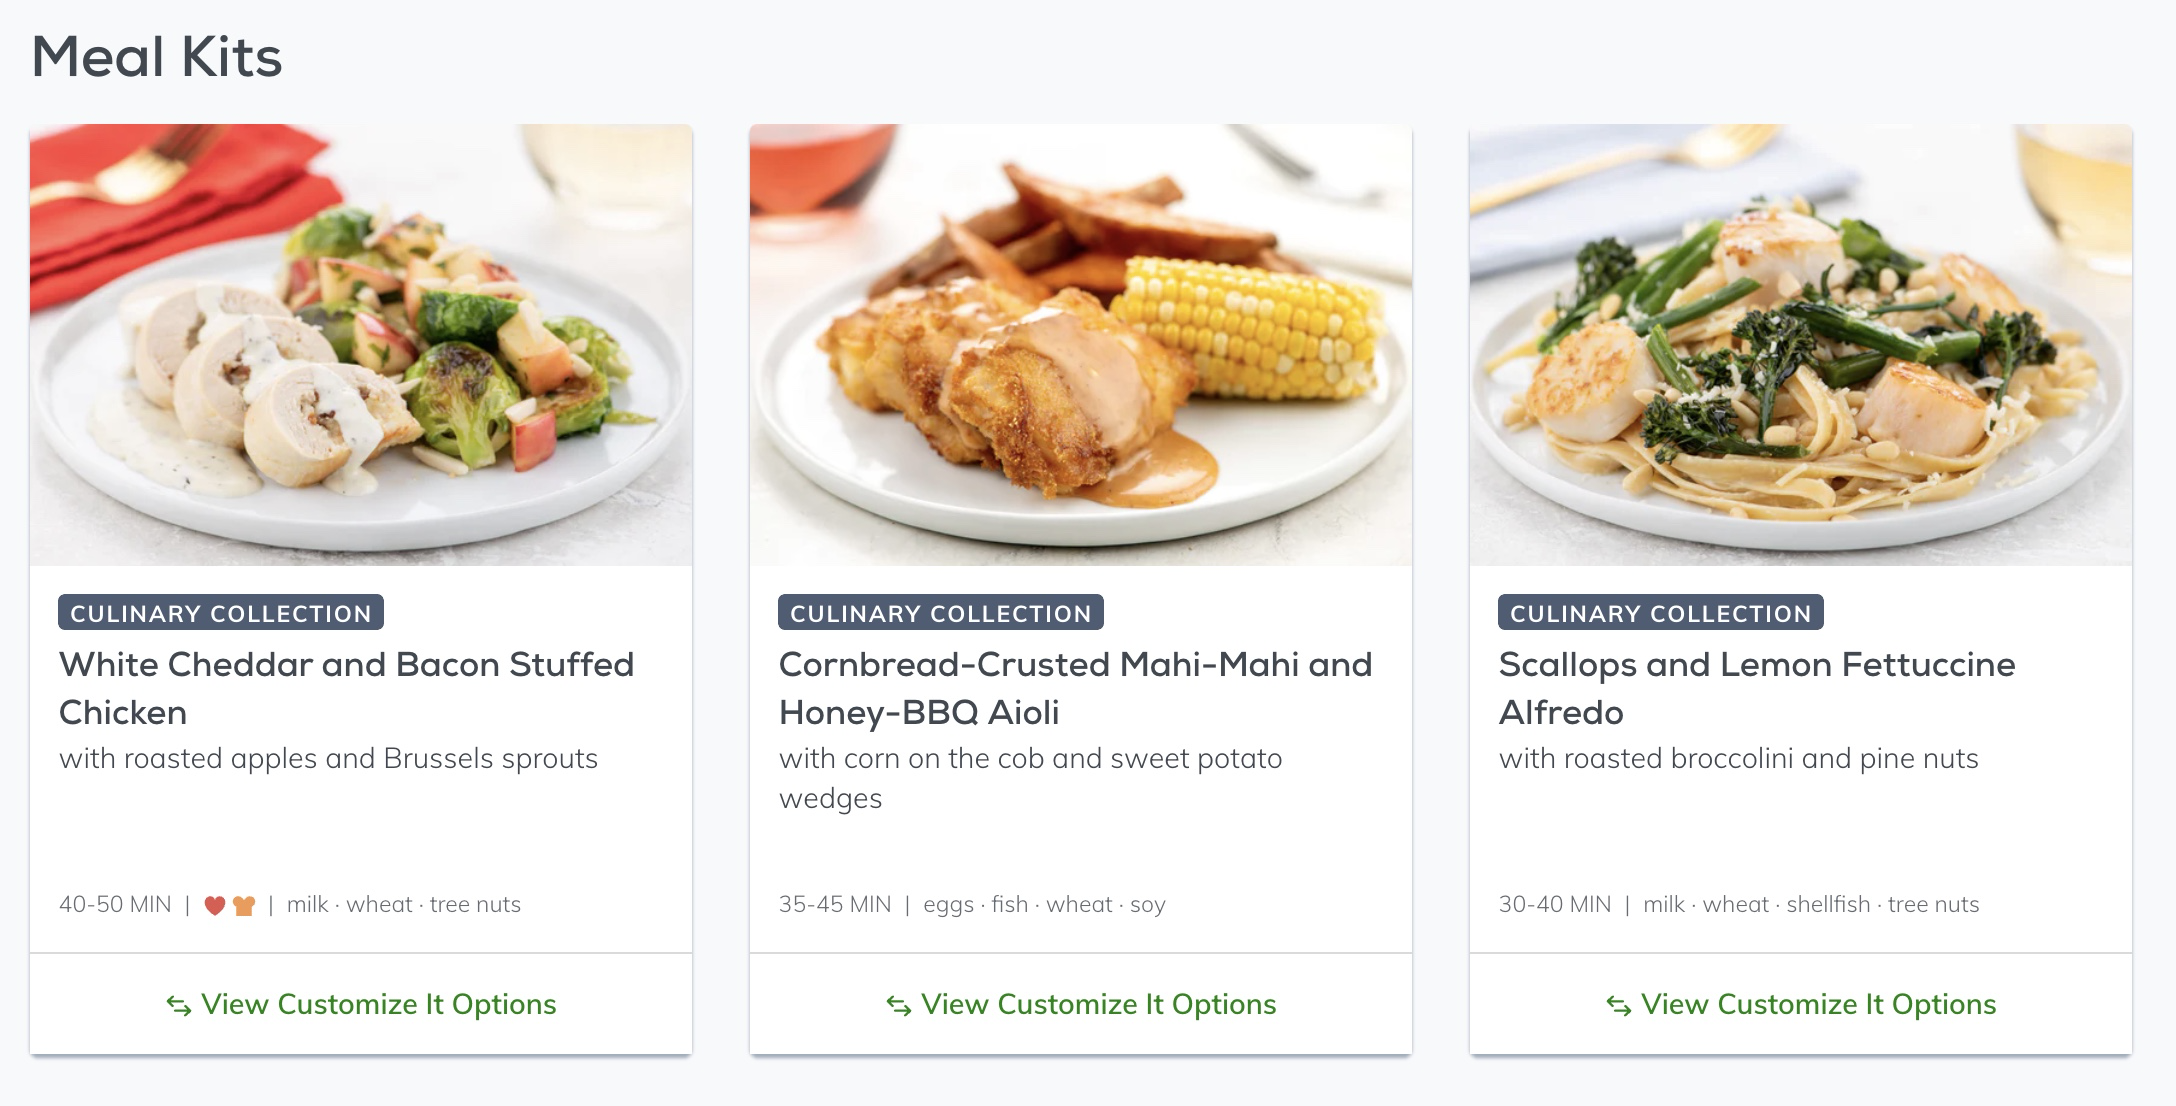 Home Chef Sale Save 90 with Nine Meals FREE! Hello Subscription